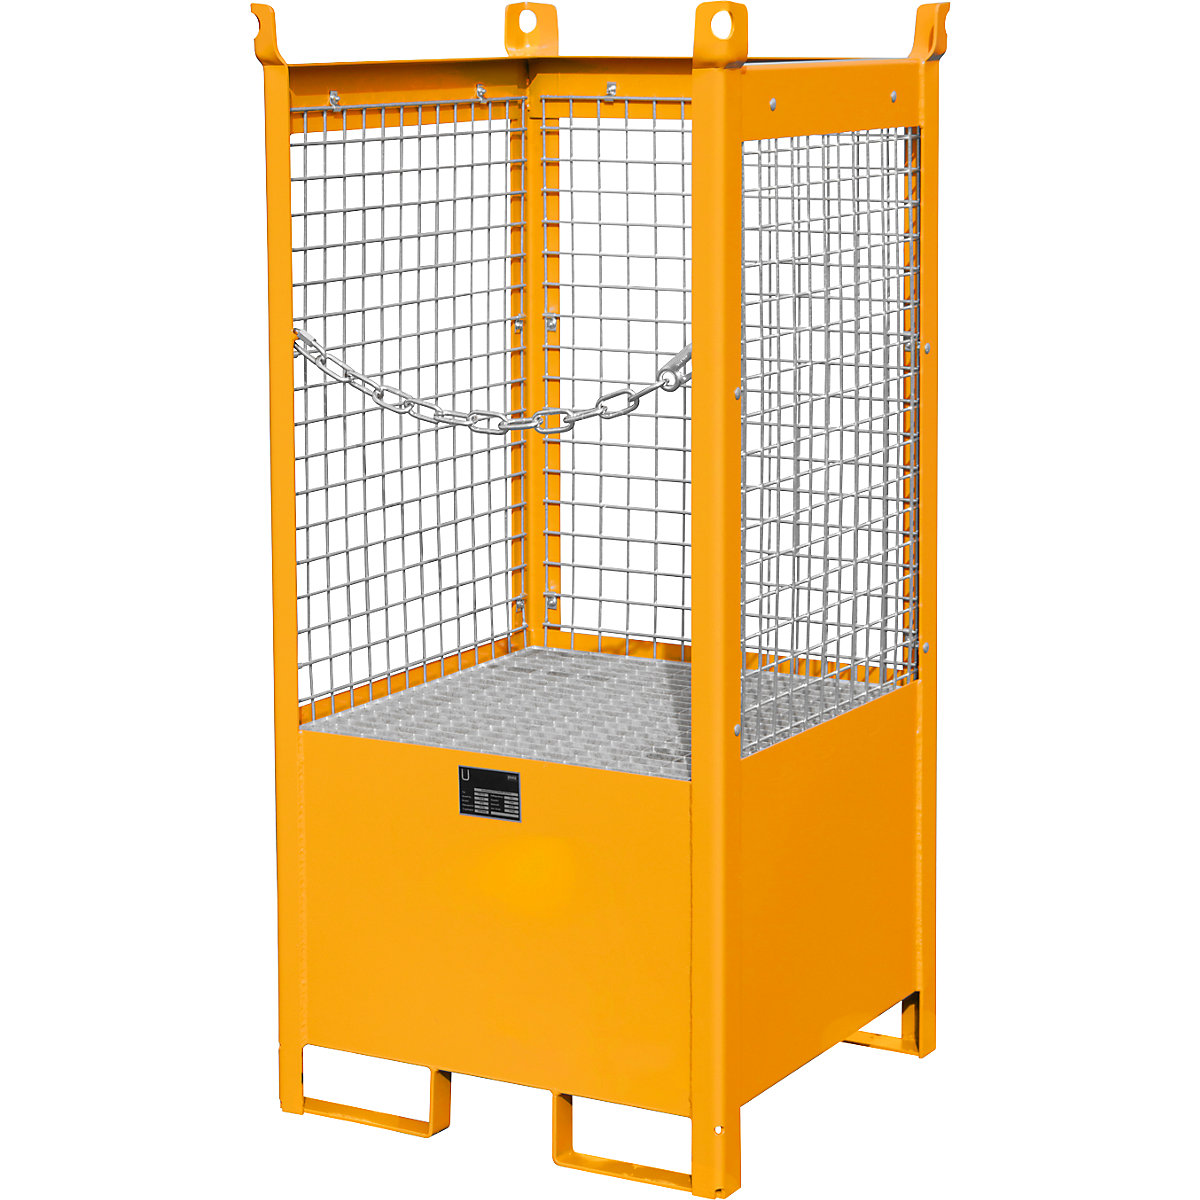 Storage and transport pallet with sump tray - eurokraft pro